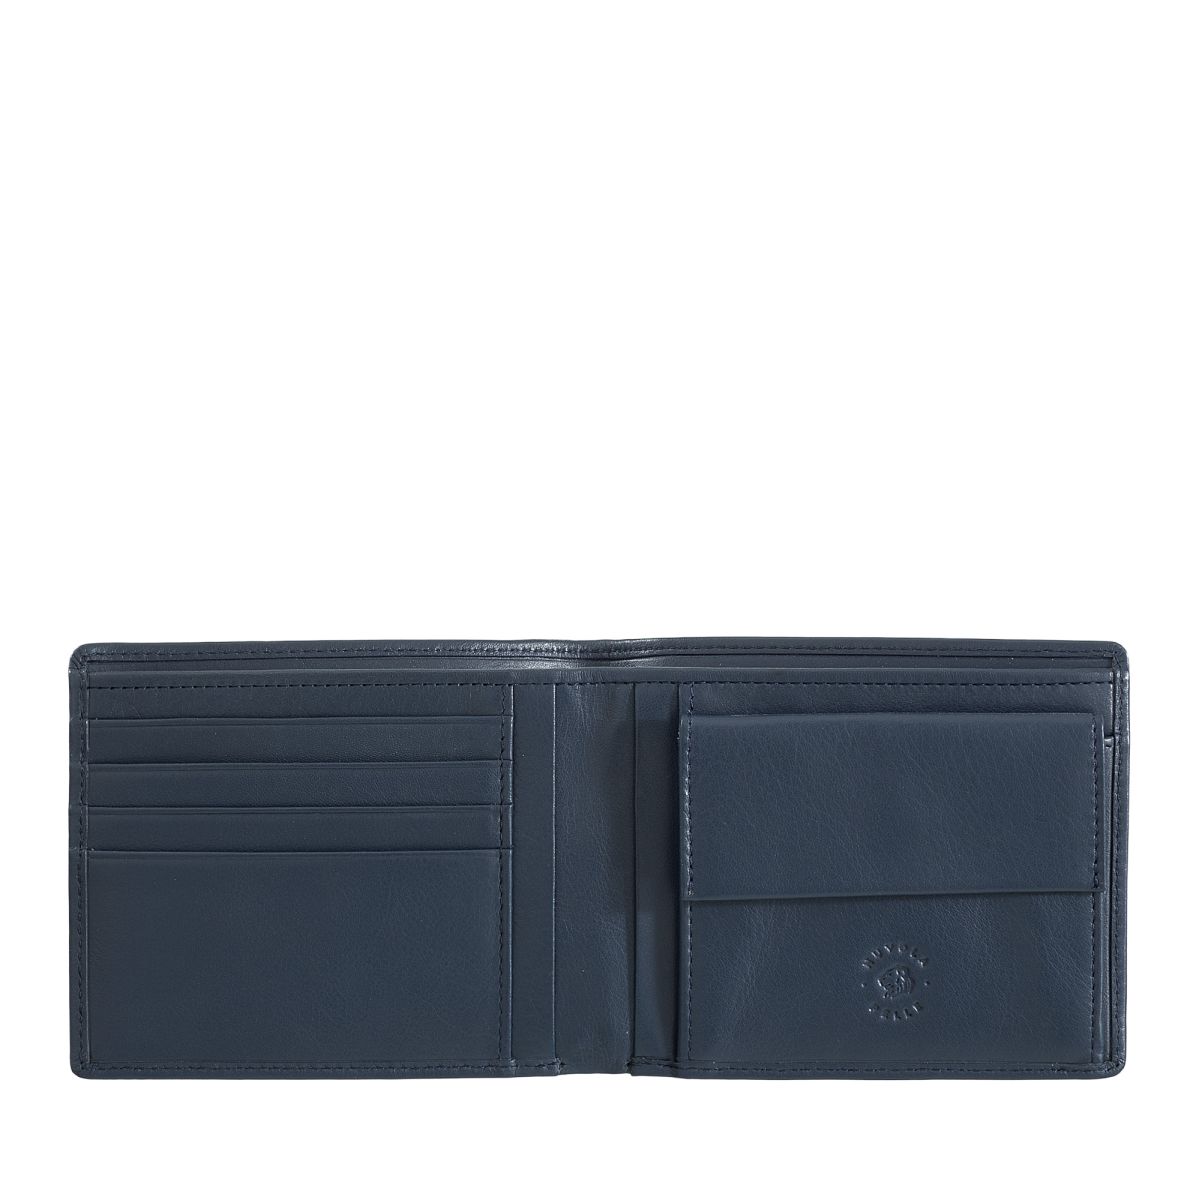 NUVOLA PELLE Slim Leather Wallet With Coin Pocket - Blue